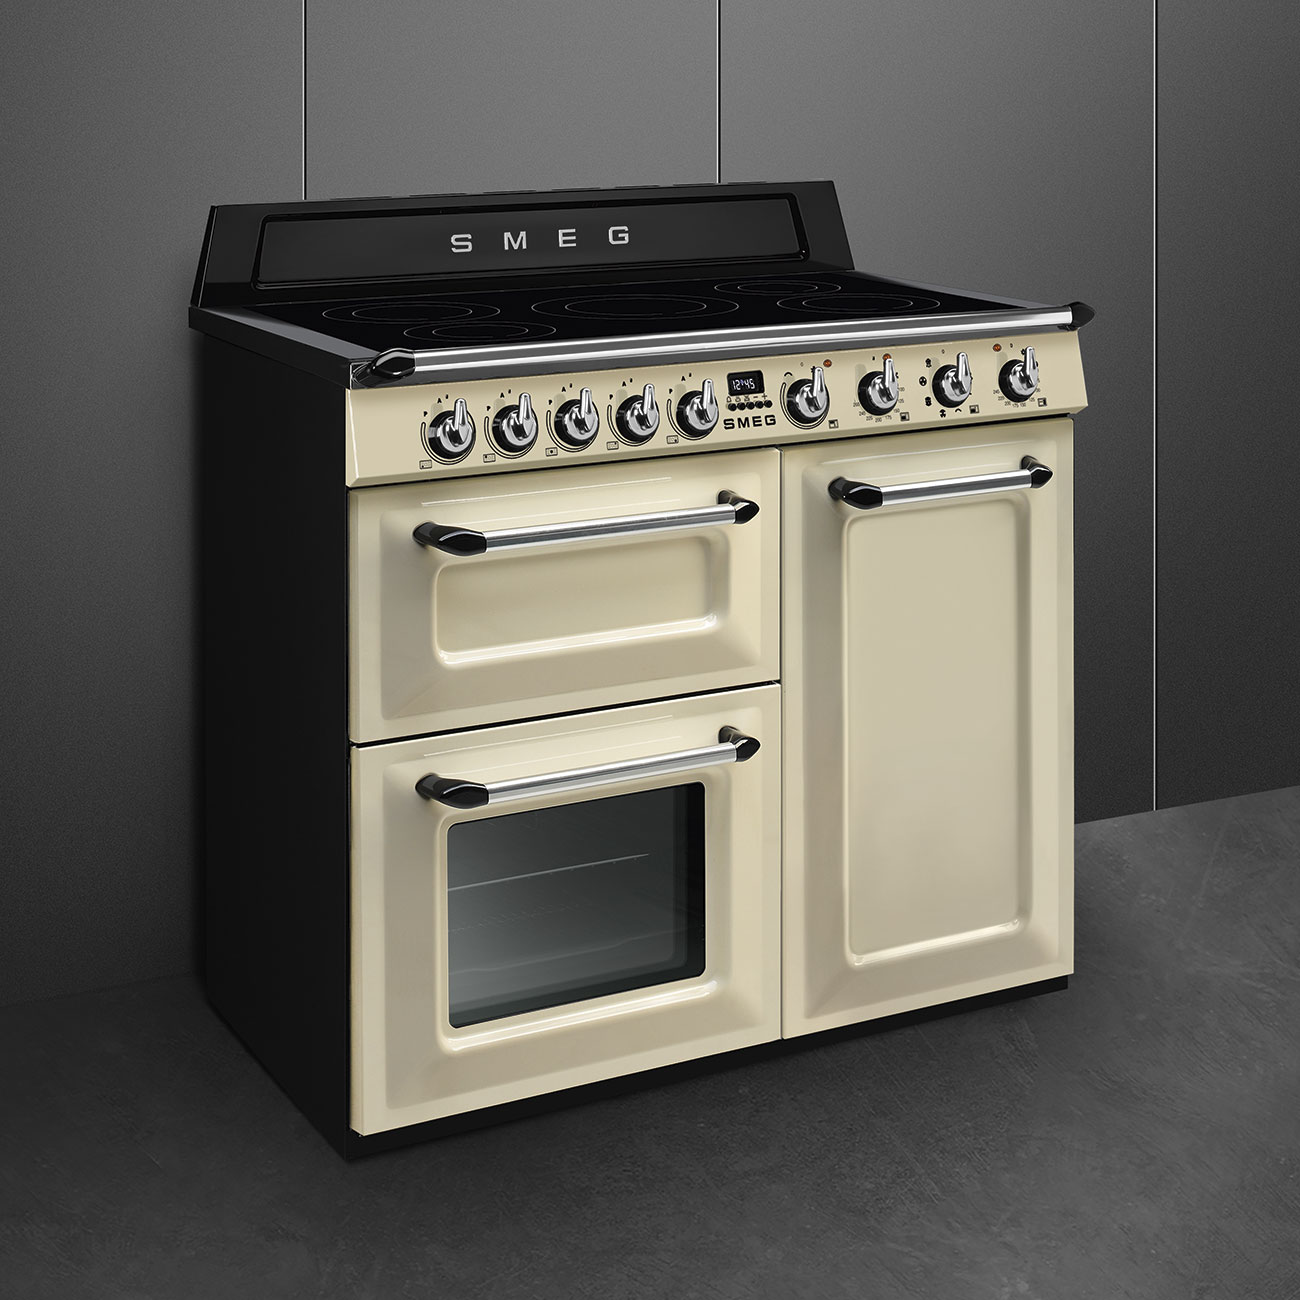 Smeg Cream Cooker with Induction Hob_3